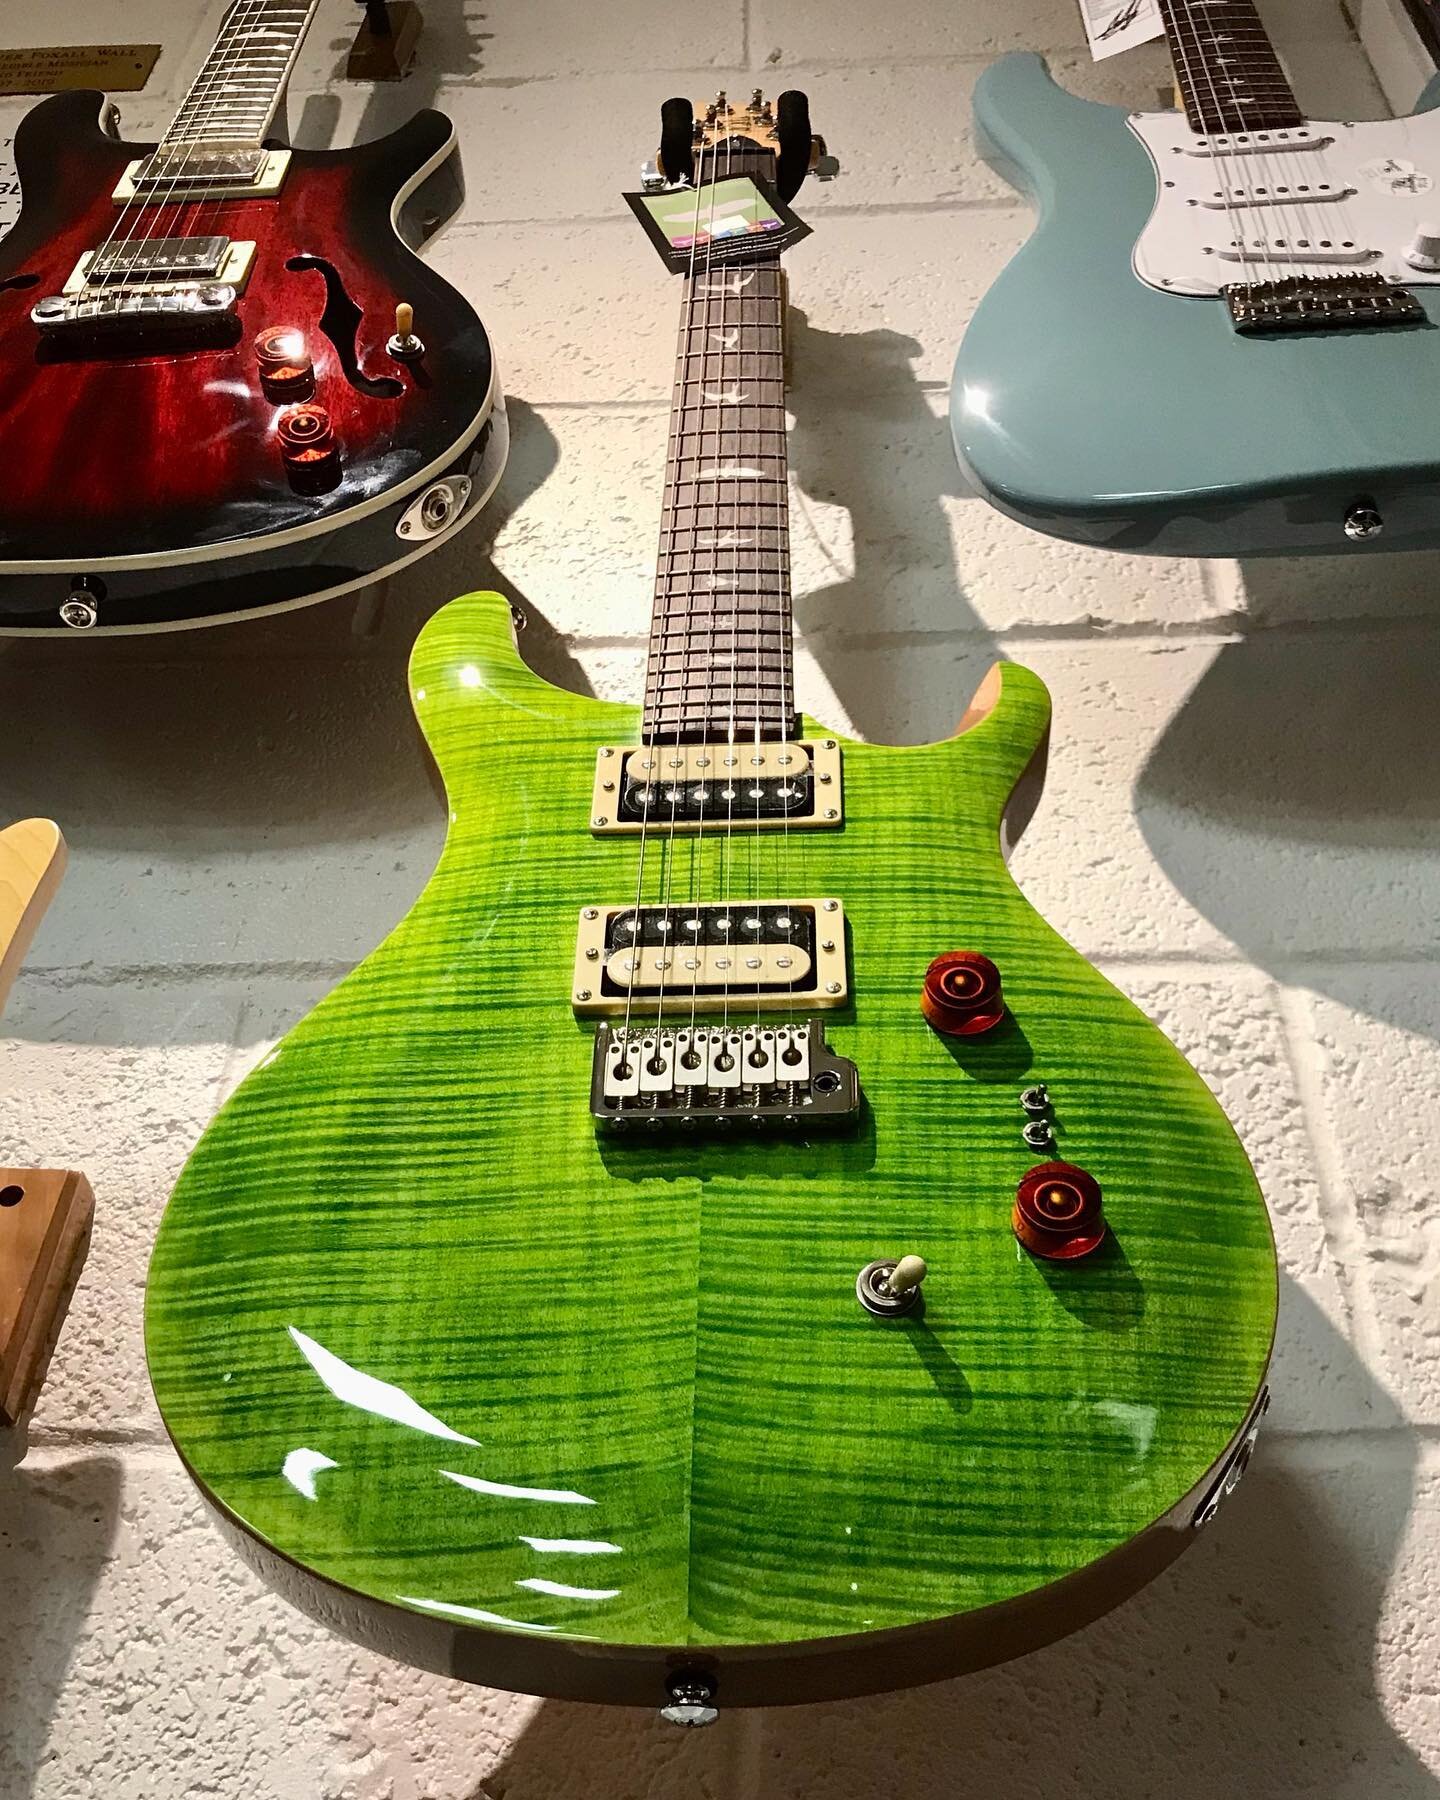 Talking of Nathan&rsquo;s lovely PRS&hellip;. It&rsquo;s back in stock with us now! @prsguitars SE Custom 24/08 Eriza Verde 🐍
Snap it up before another member of staff buys it&hellip;.